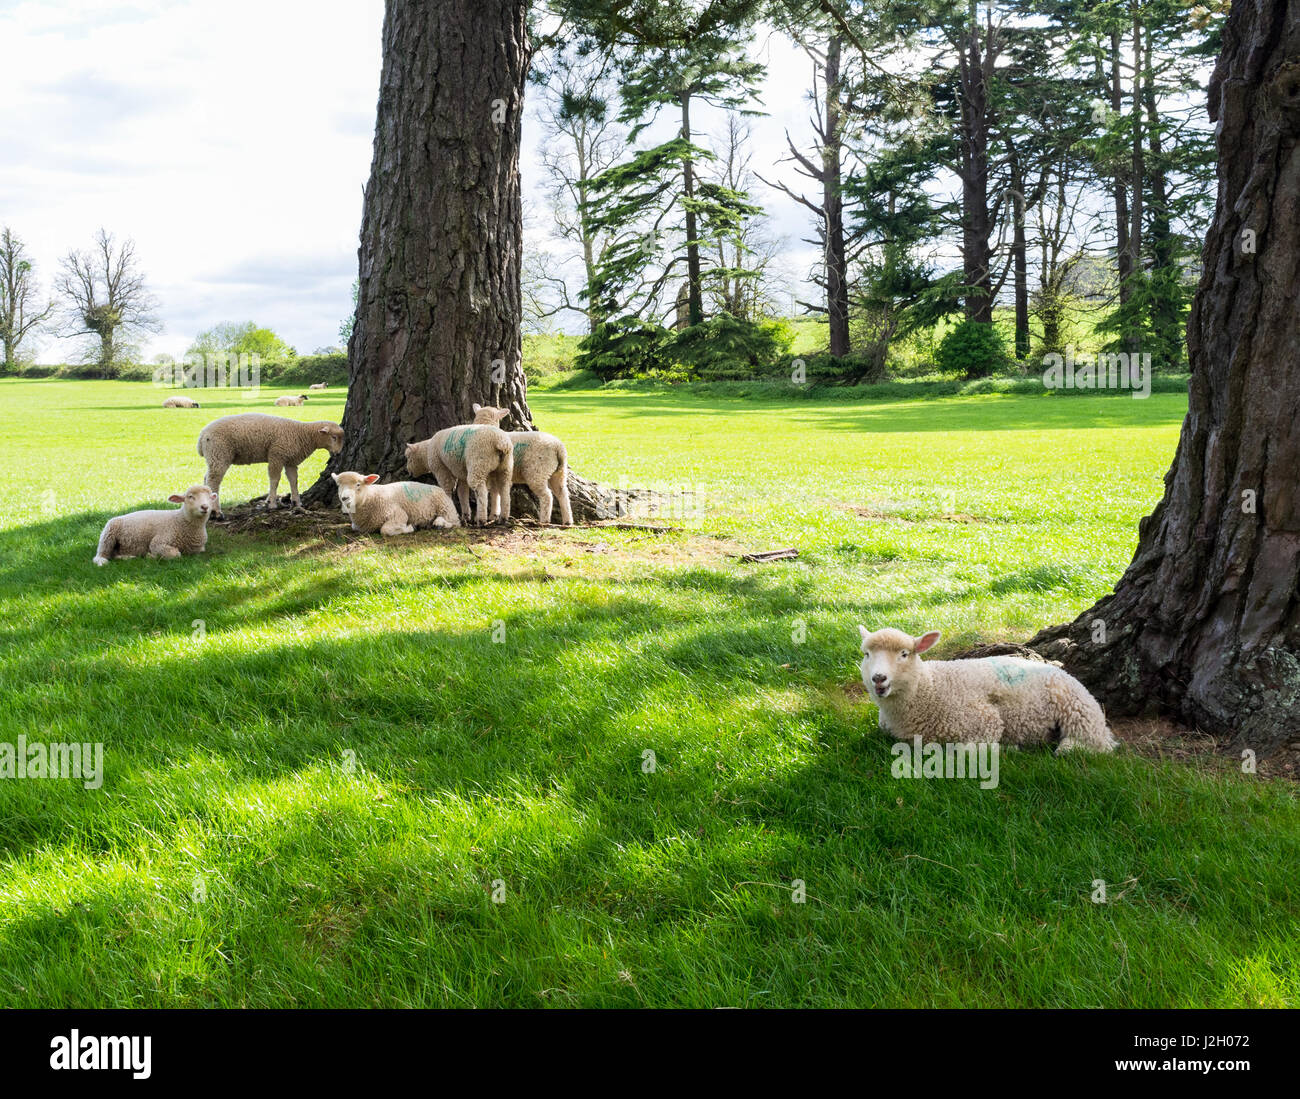 Sheep with their lambs gathering in a picturesque meadow under trees and a blue sky. Stock Photo